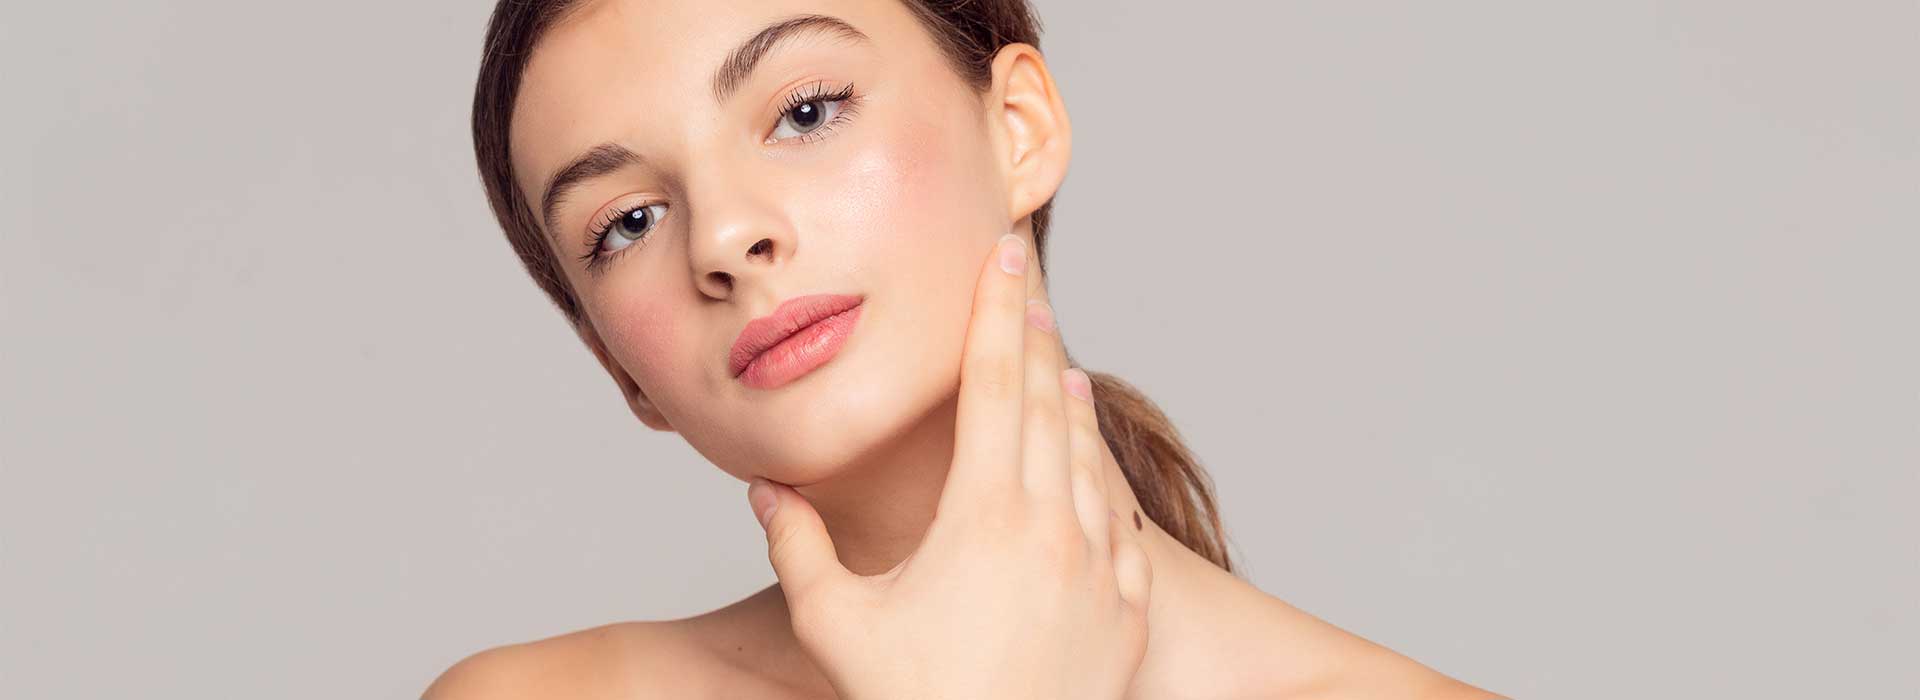 Lower Face and Neck Lifts treatments at Perfect Skin MD